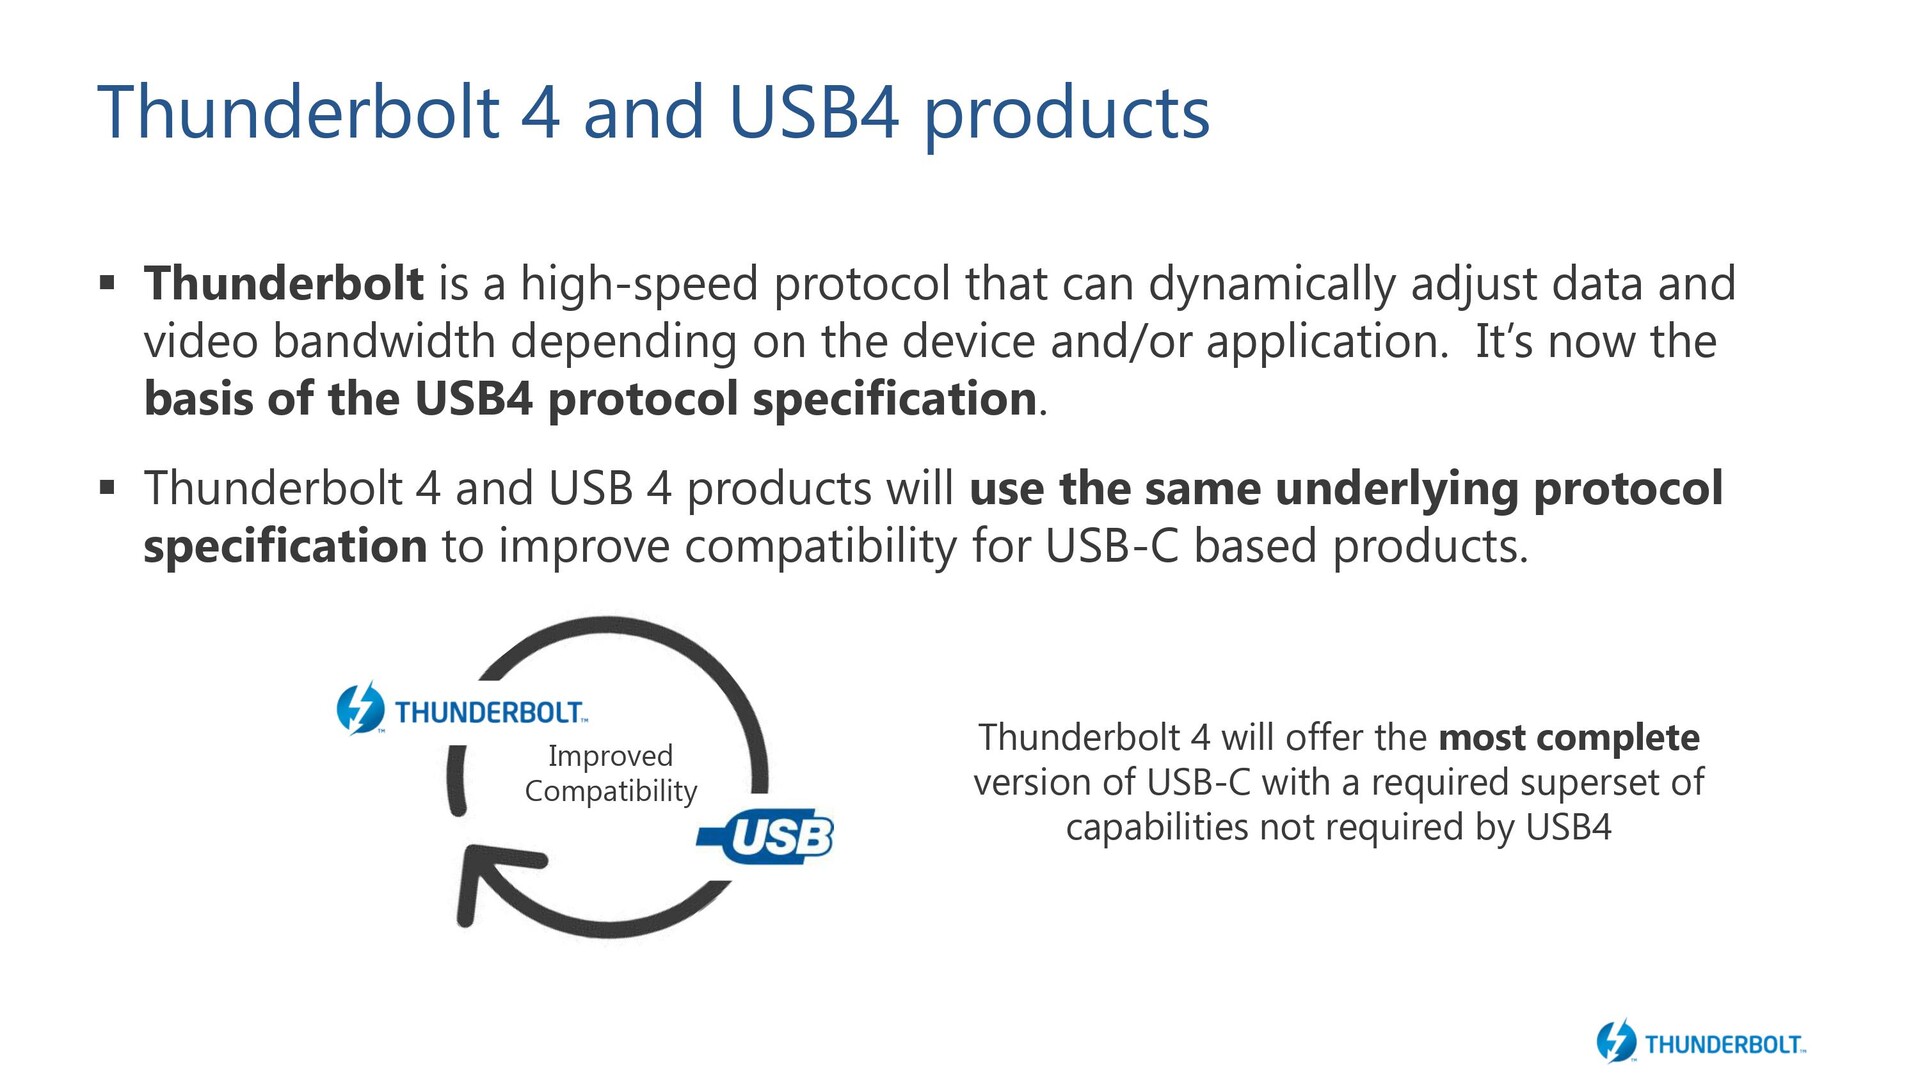 Does the upgrade to Thunderbolt 4 evolve or just enhance our user